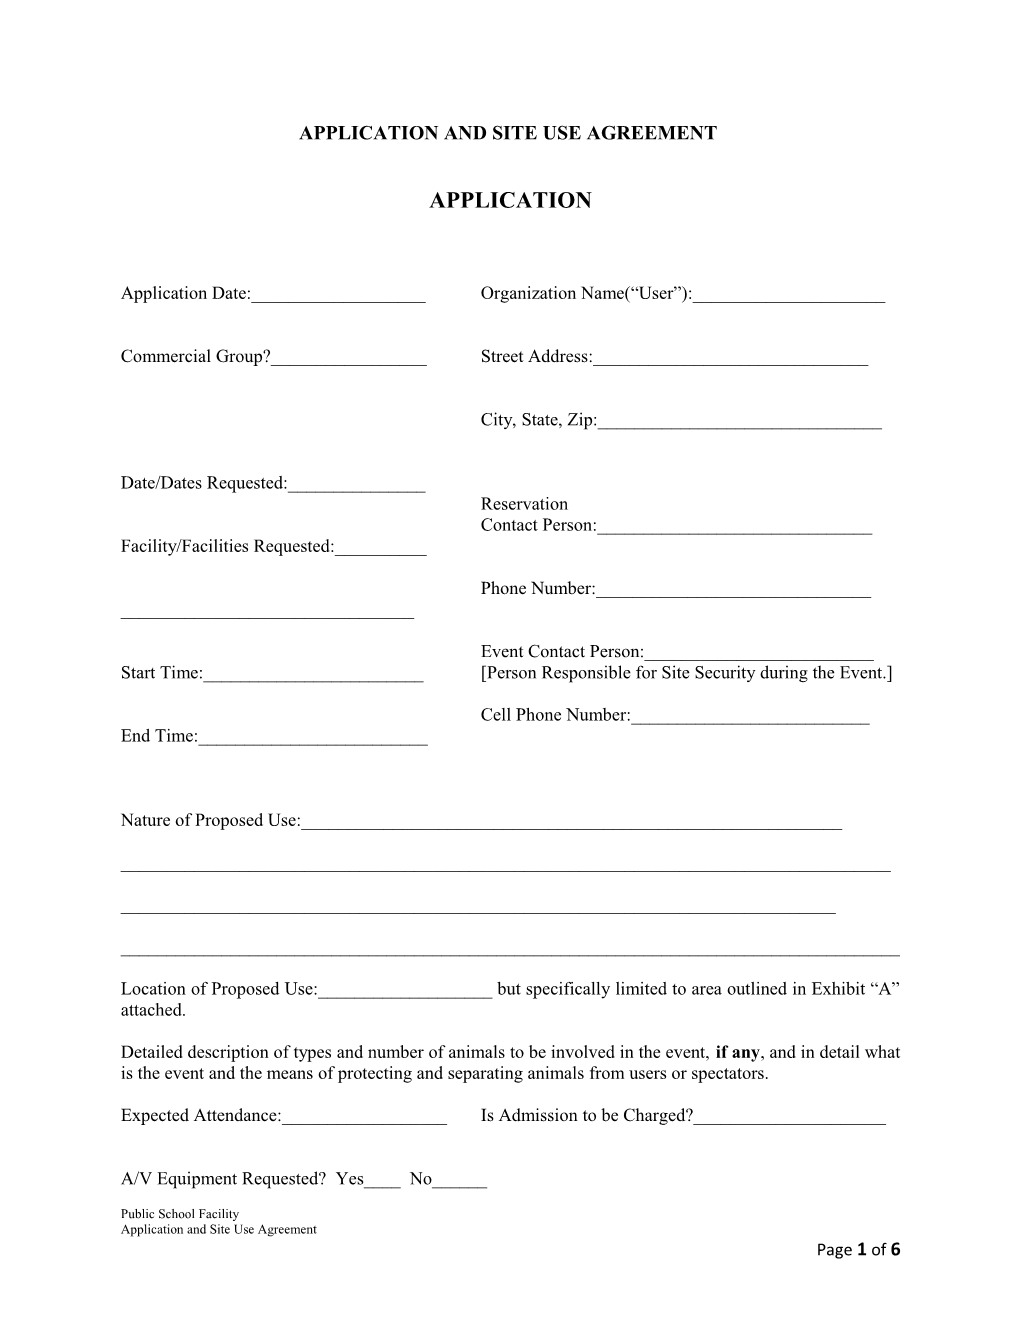 Application and Site Use Agreement